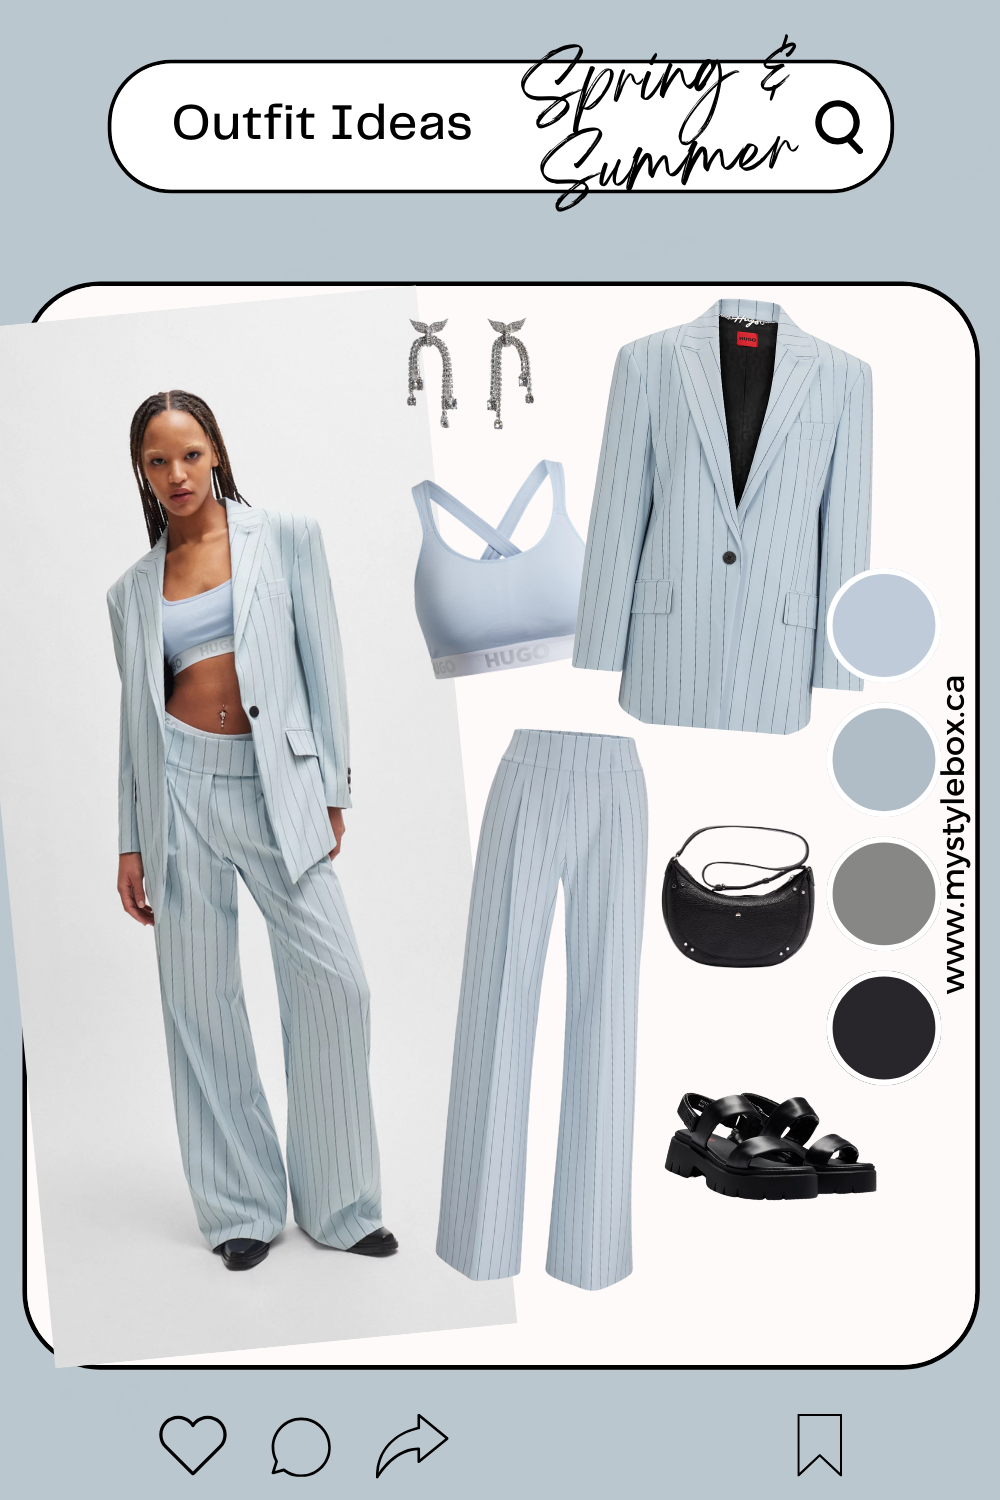 Fashion Inspiration, Outfit Combination Ideas